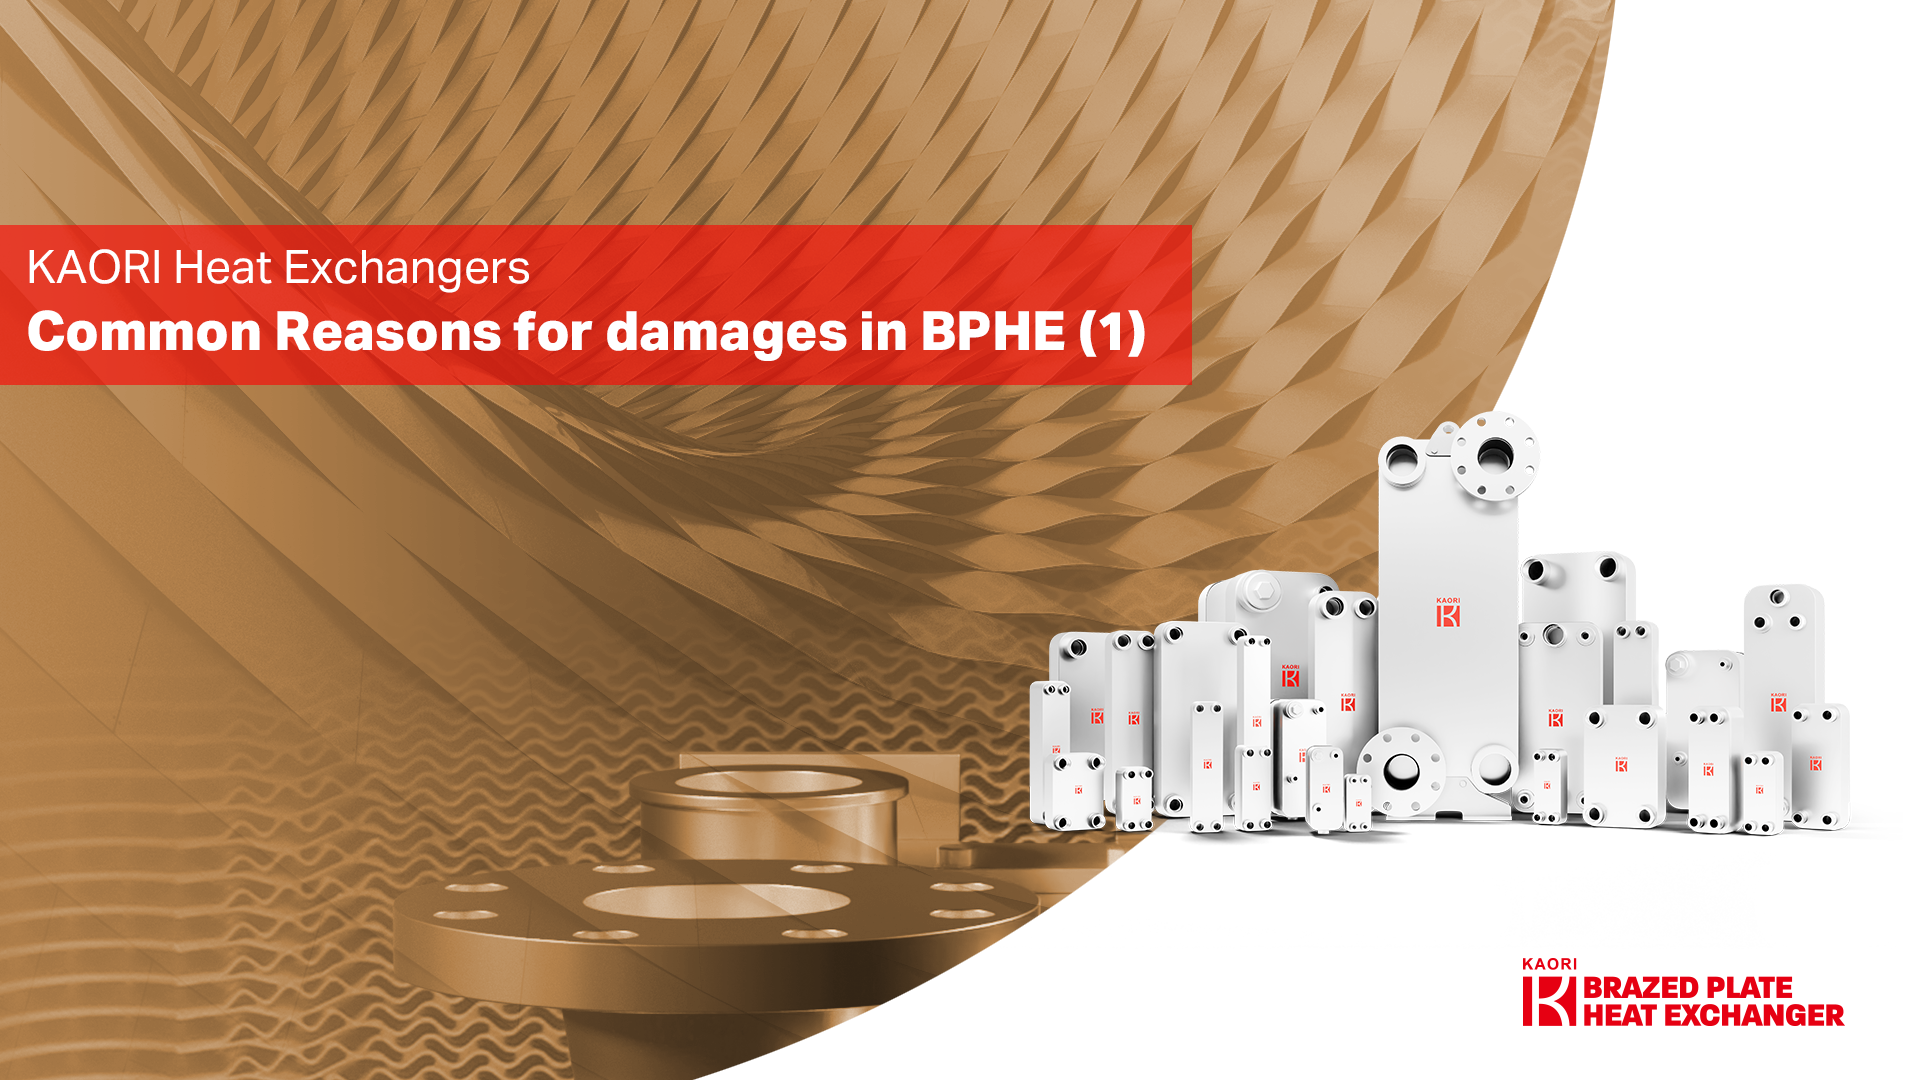  Common Reasons for Damages in BPHEs- (1) Scaling 